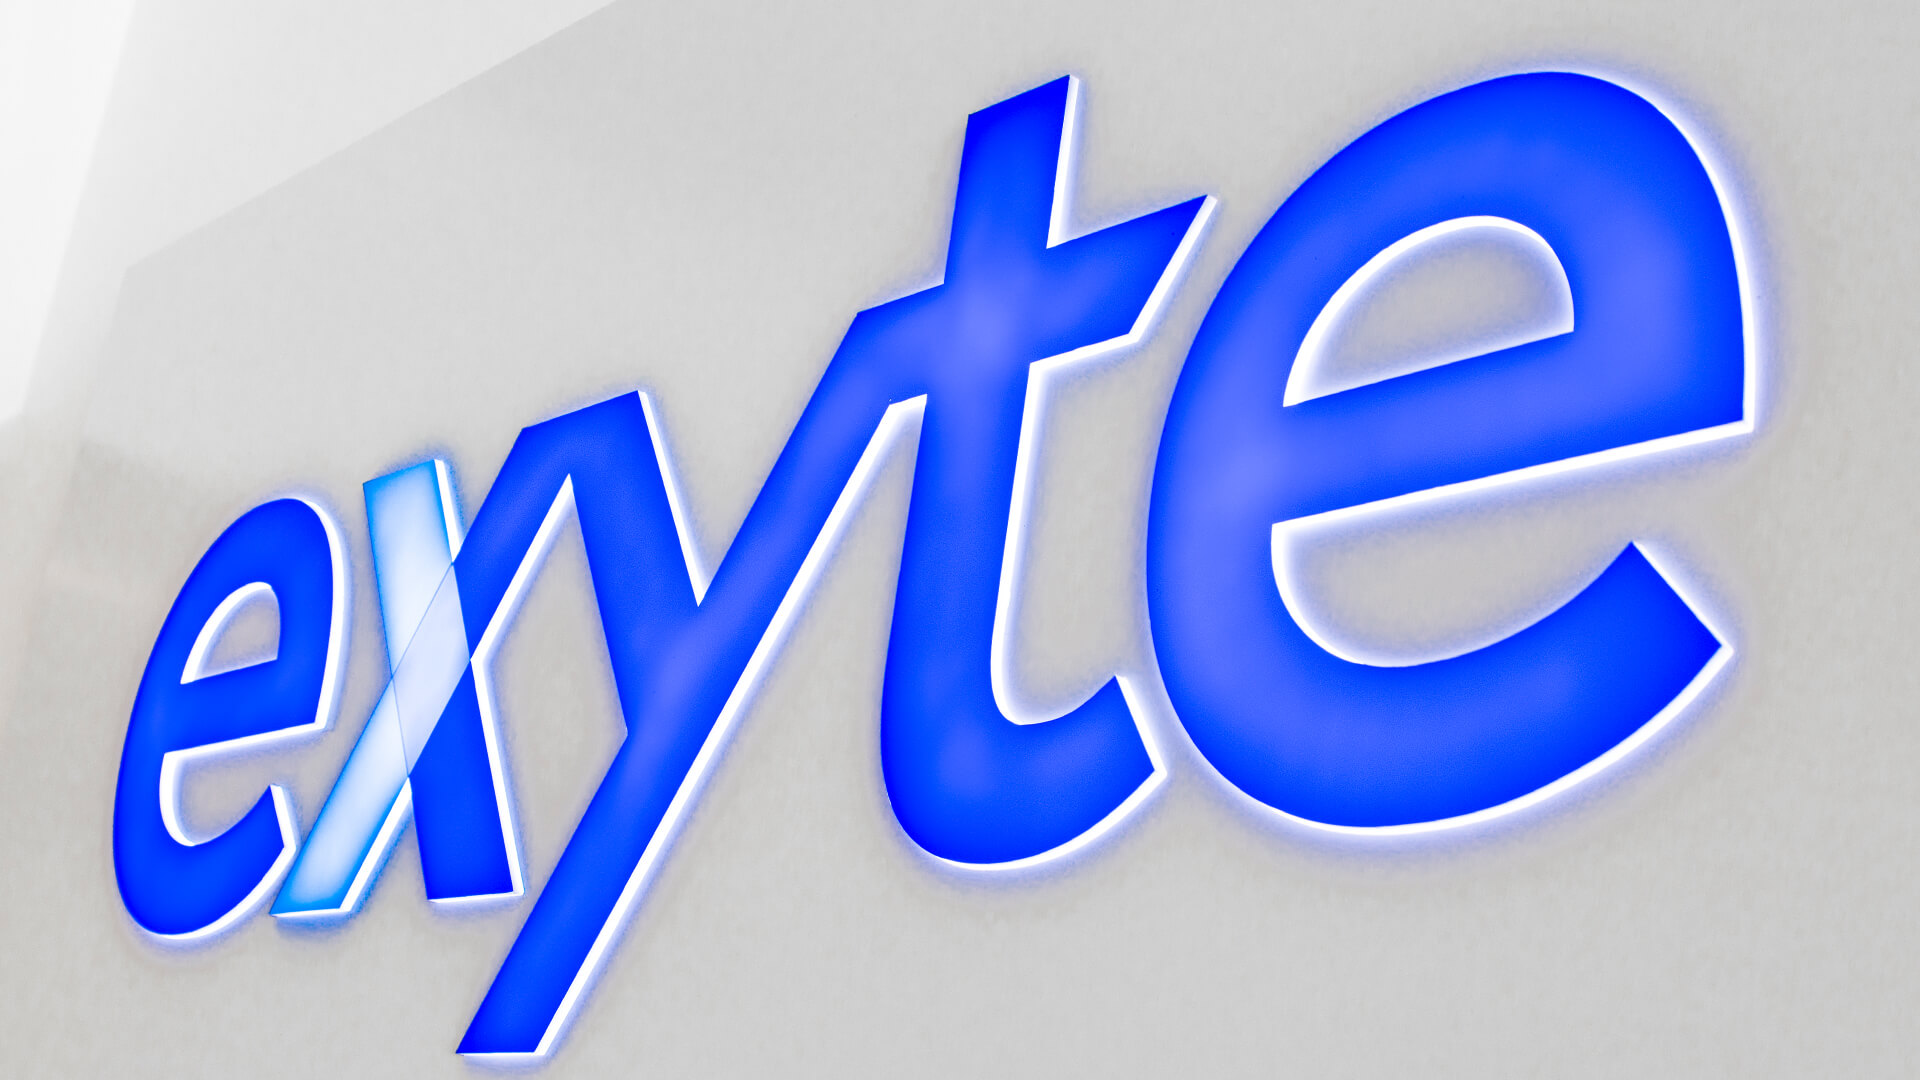 exyte exit exite - exyte-cashboard-on-the-wall-interior-of-the-office-behind-the-reception-blue-logo-back-lit-cashboard-for-order-gdansk-park-technological-scientific